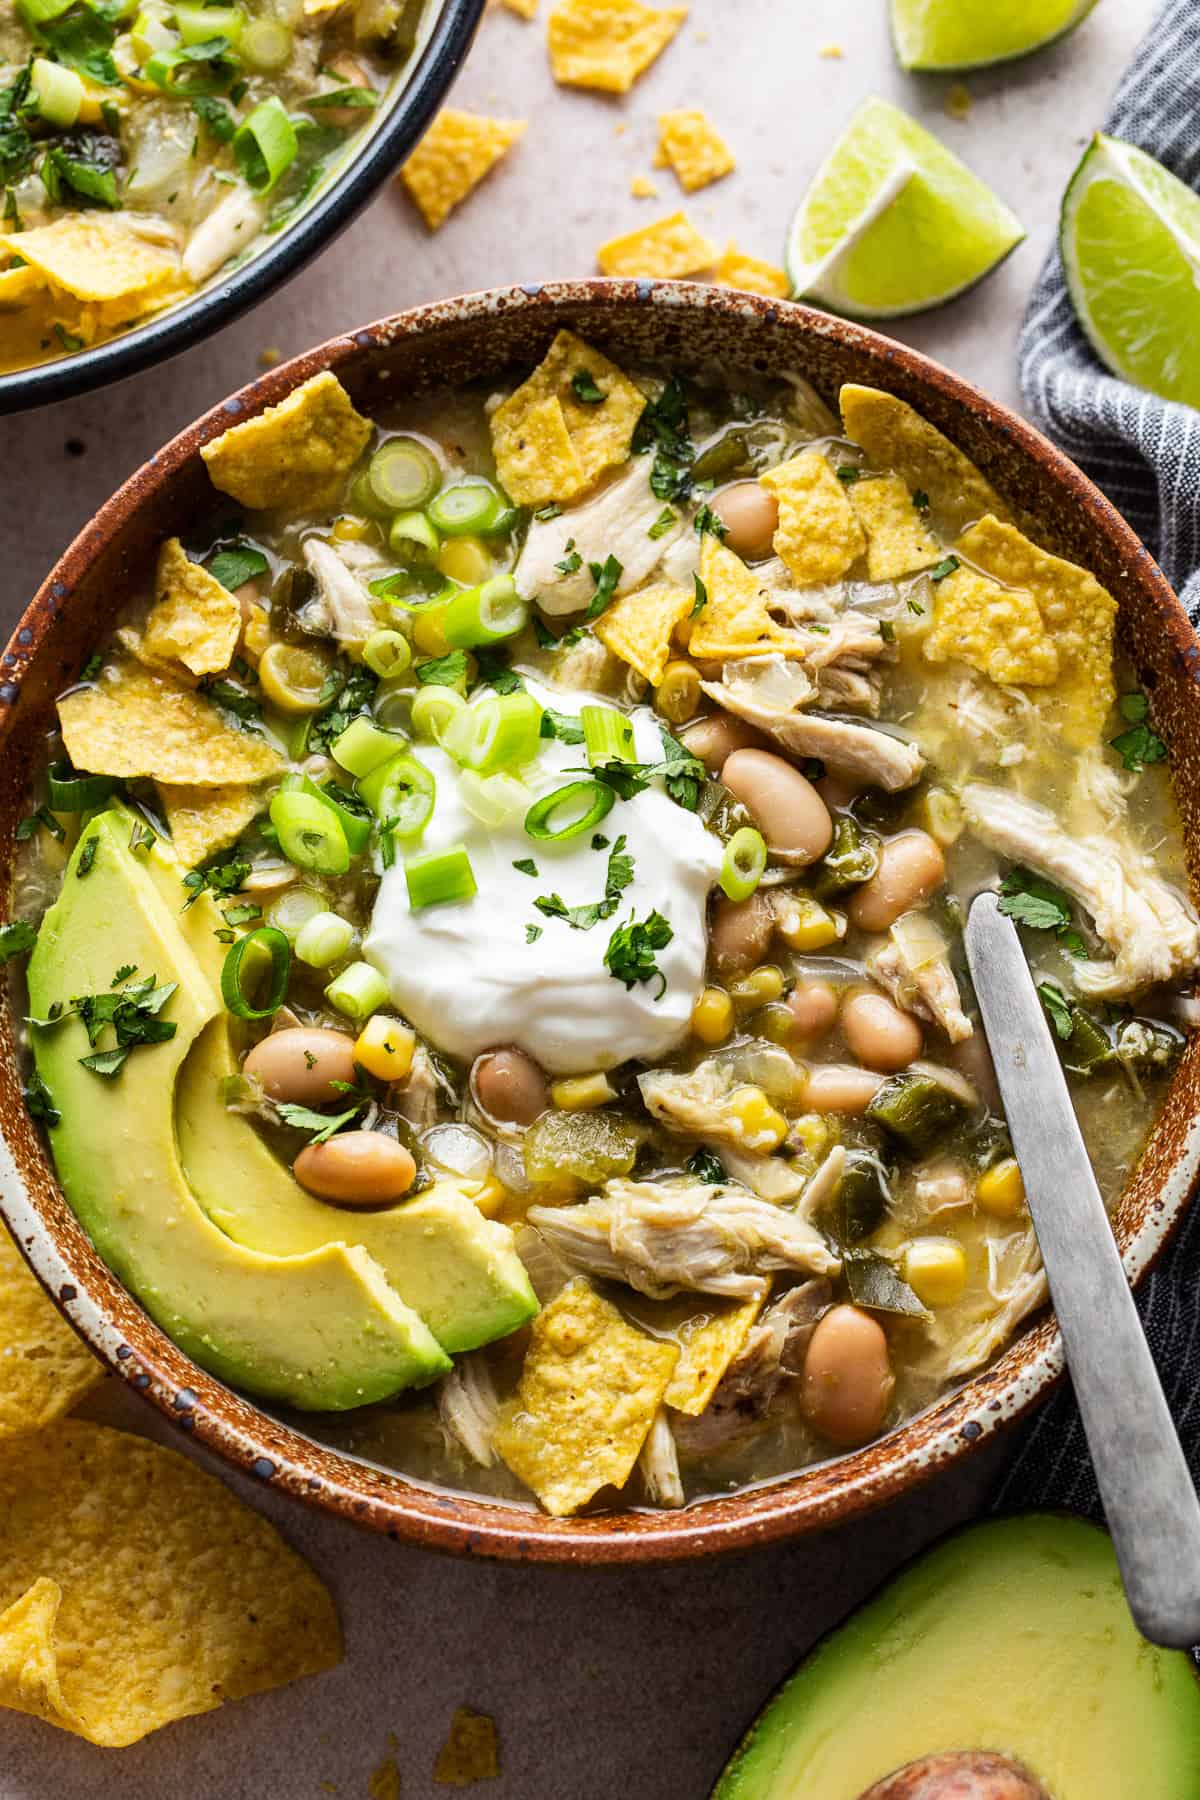 Green chicken chili in a bowl garnished with sour cream, tortilla chips, avocado, cilantro, and green onions.